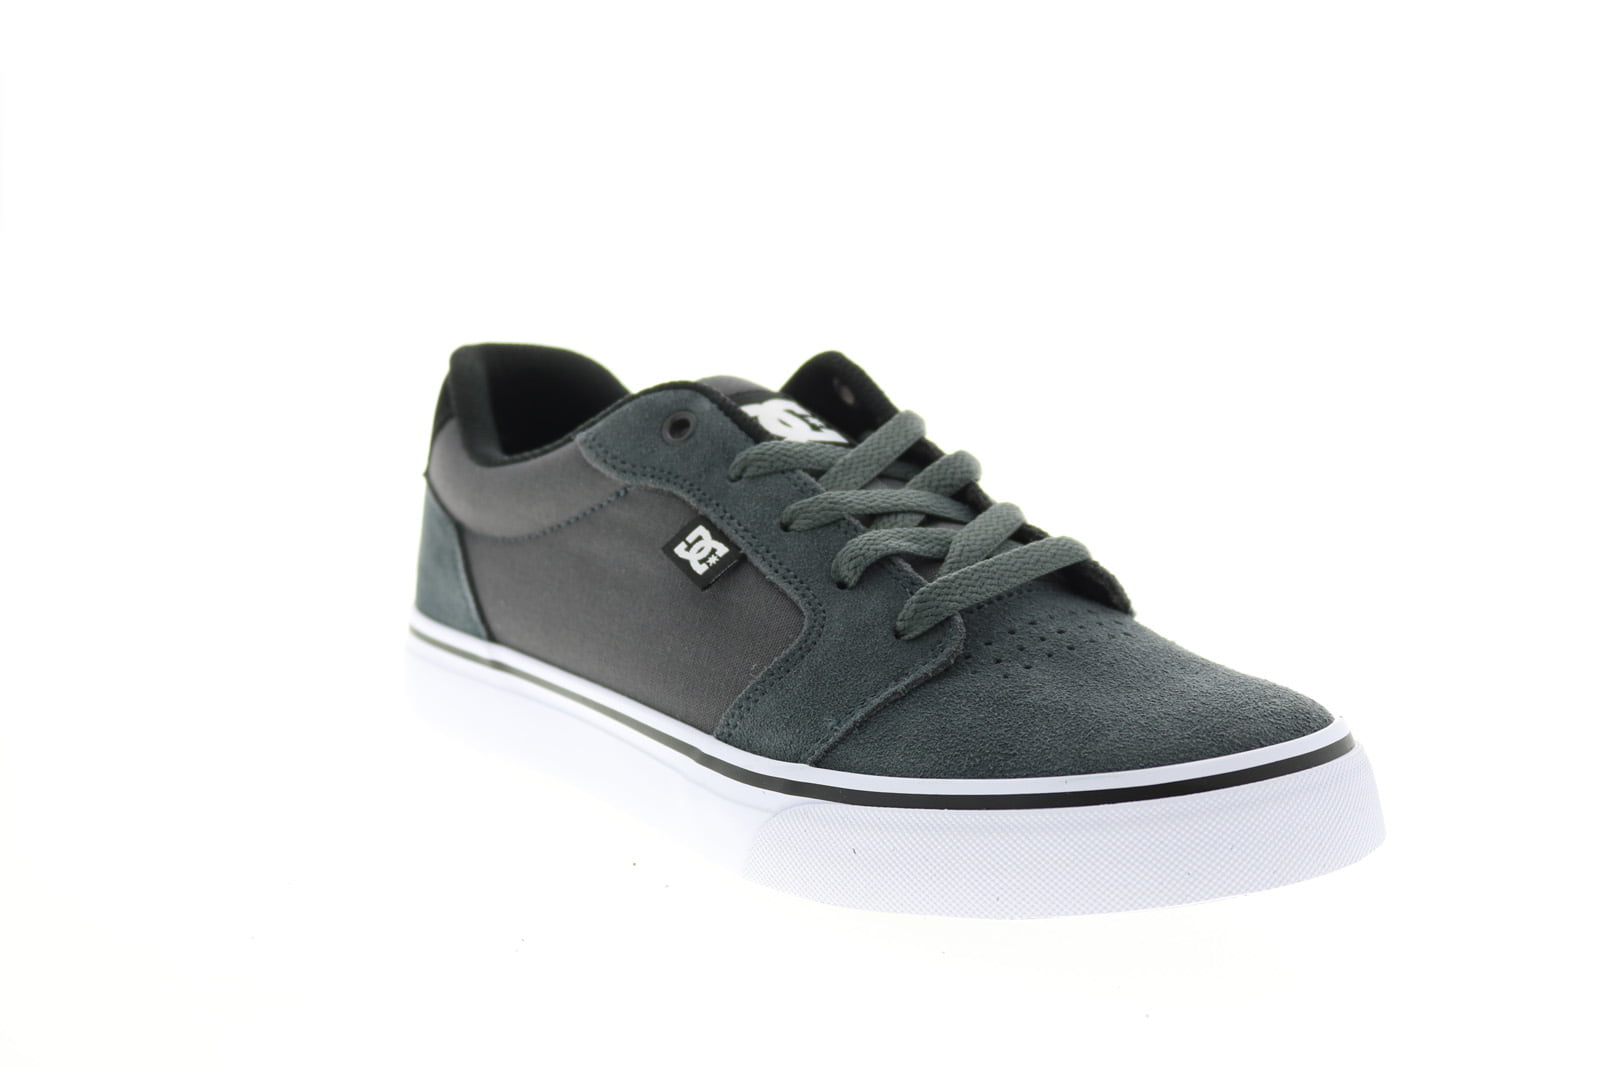 DC Anvil 303190-DSW Mens Gray Suede Skate Inspired Sneakers Shoes